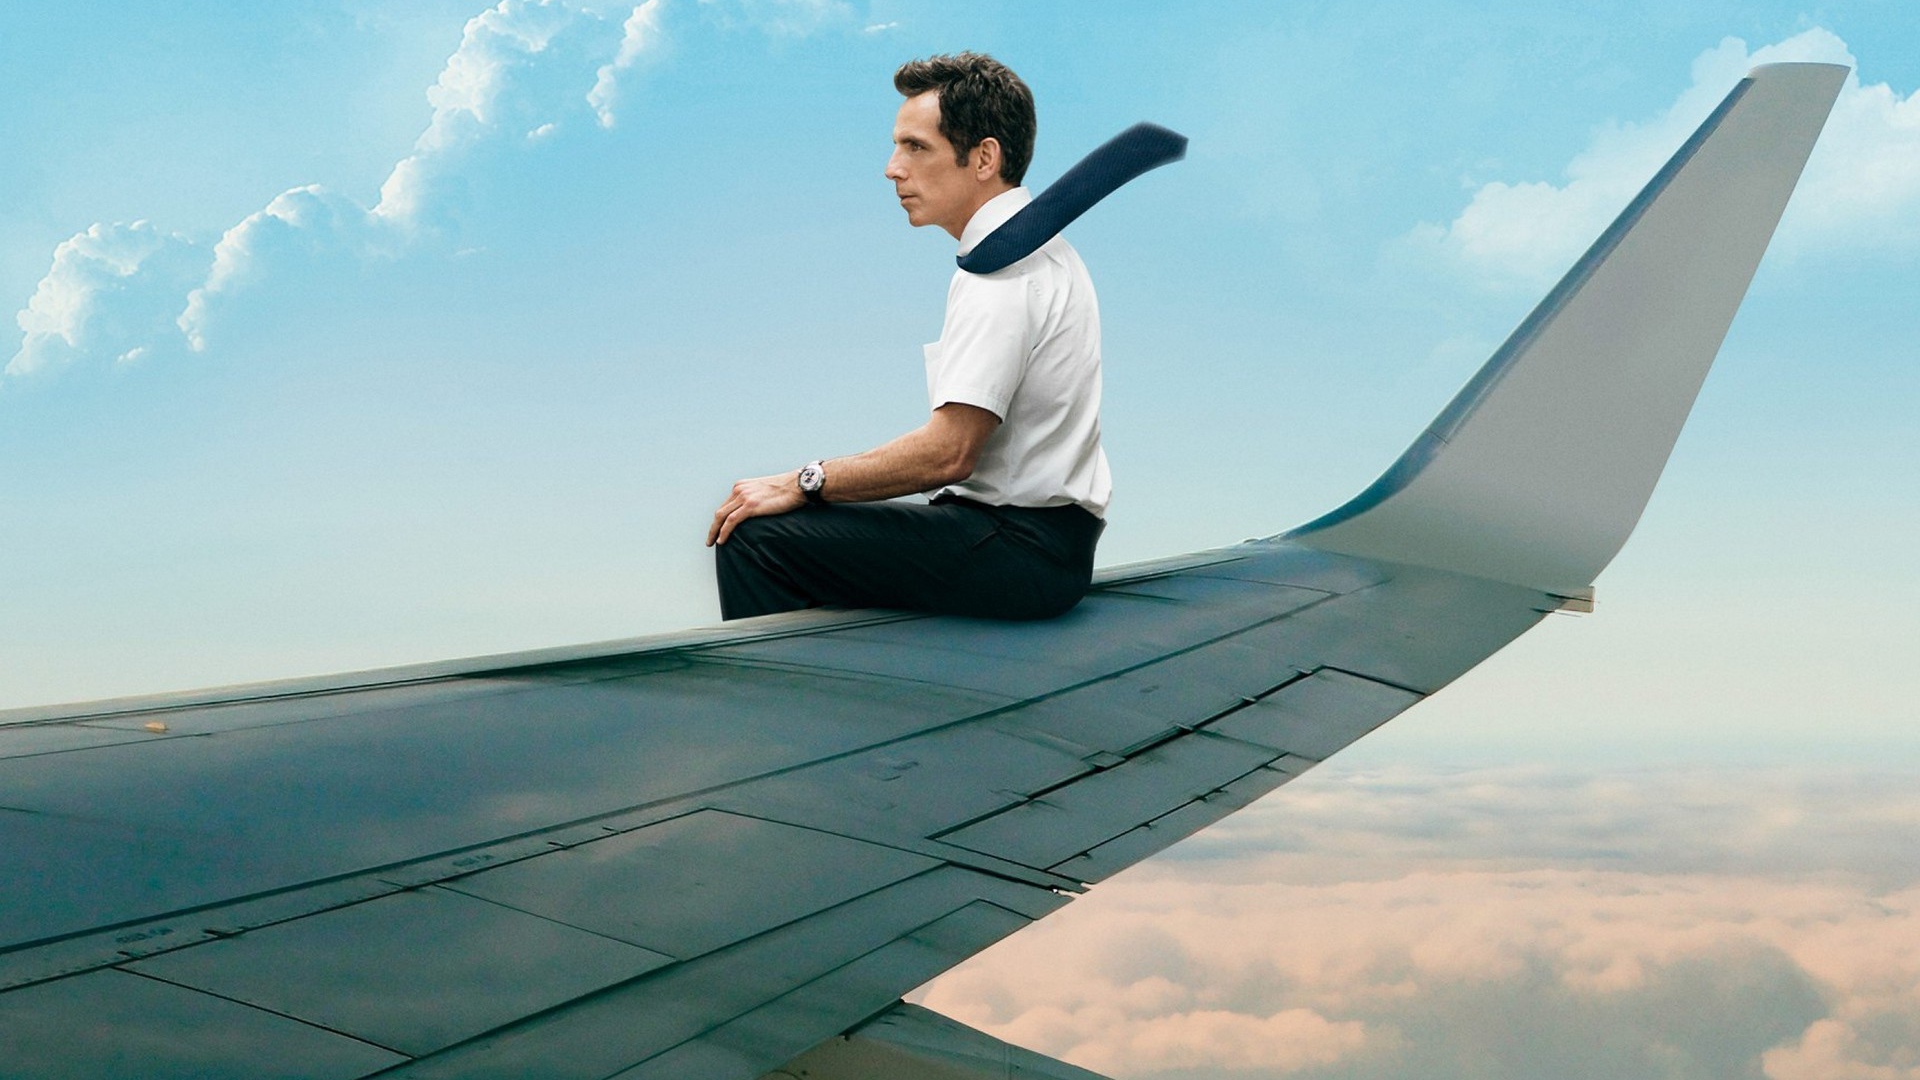 The man is sitting on the wing of an airplane